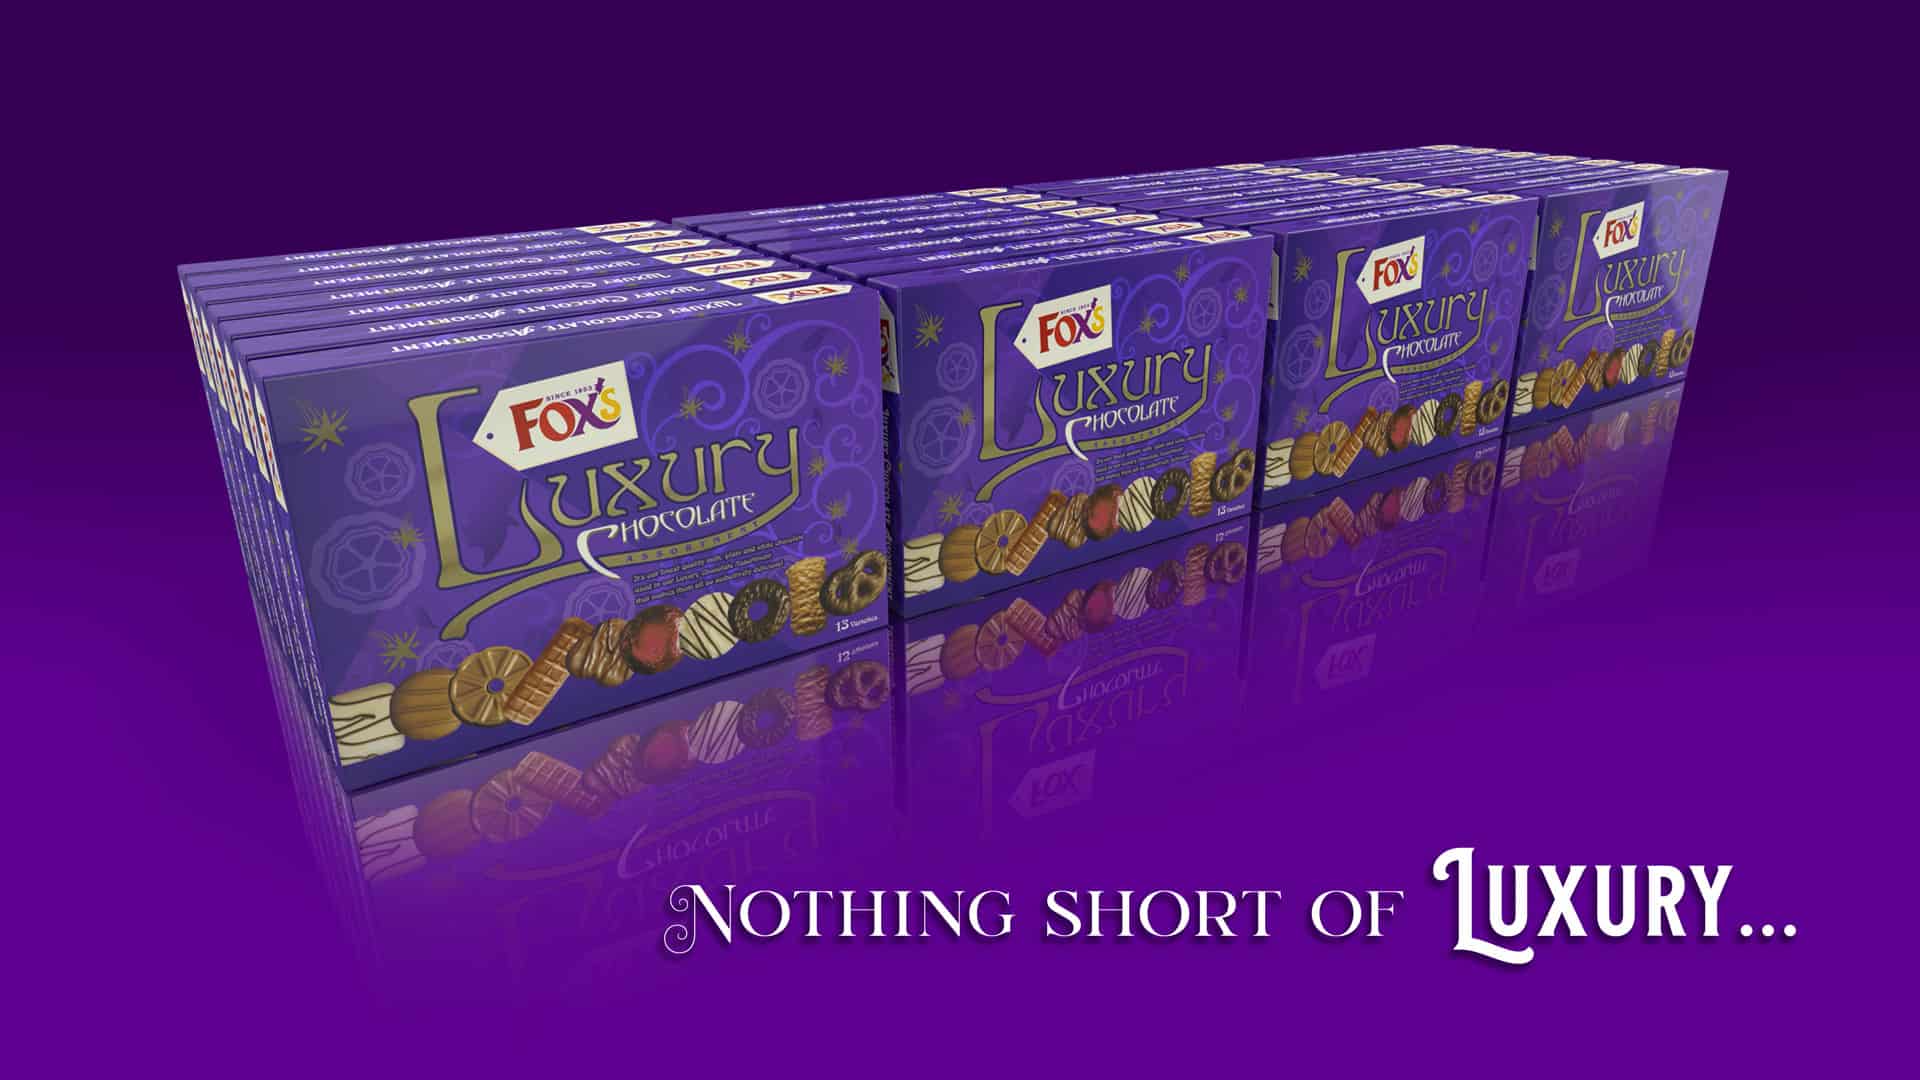 Fox's Biscuits packaging, Luxury Biscuits image 3